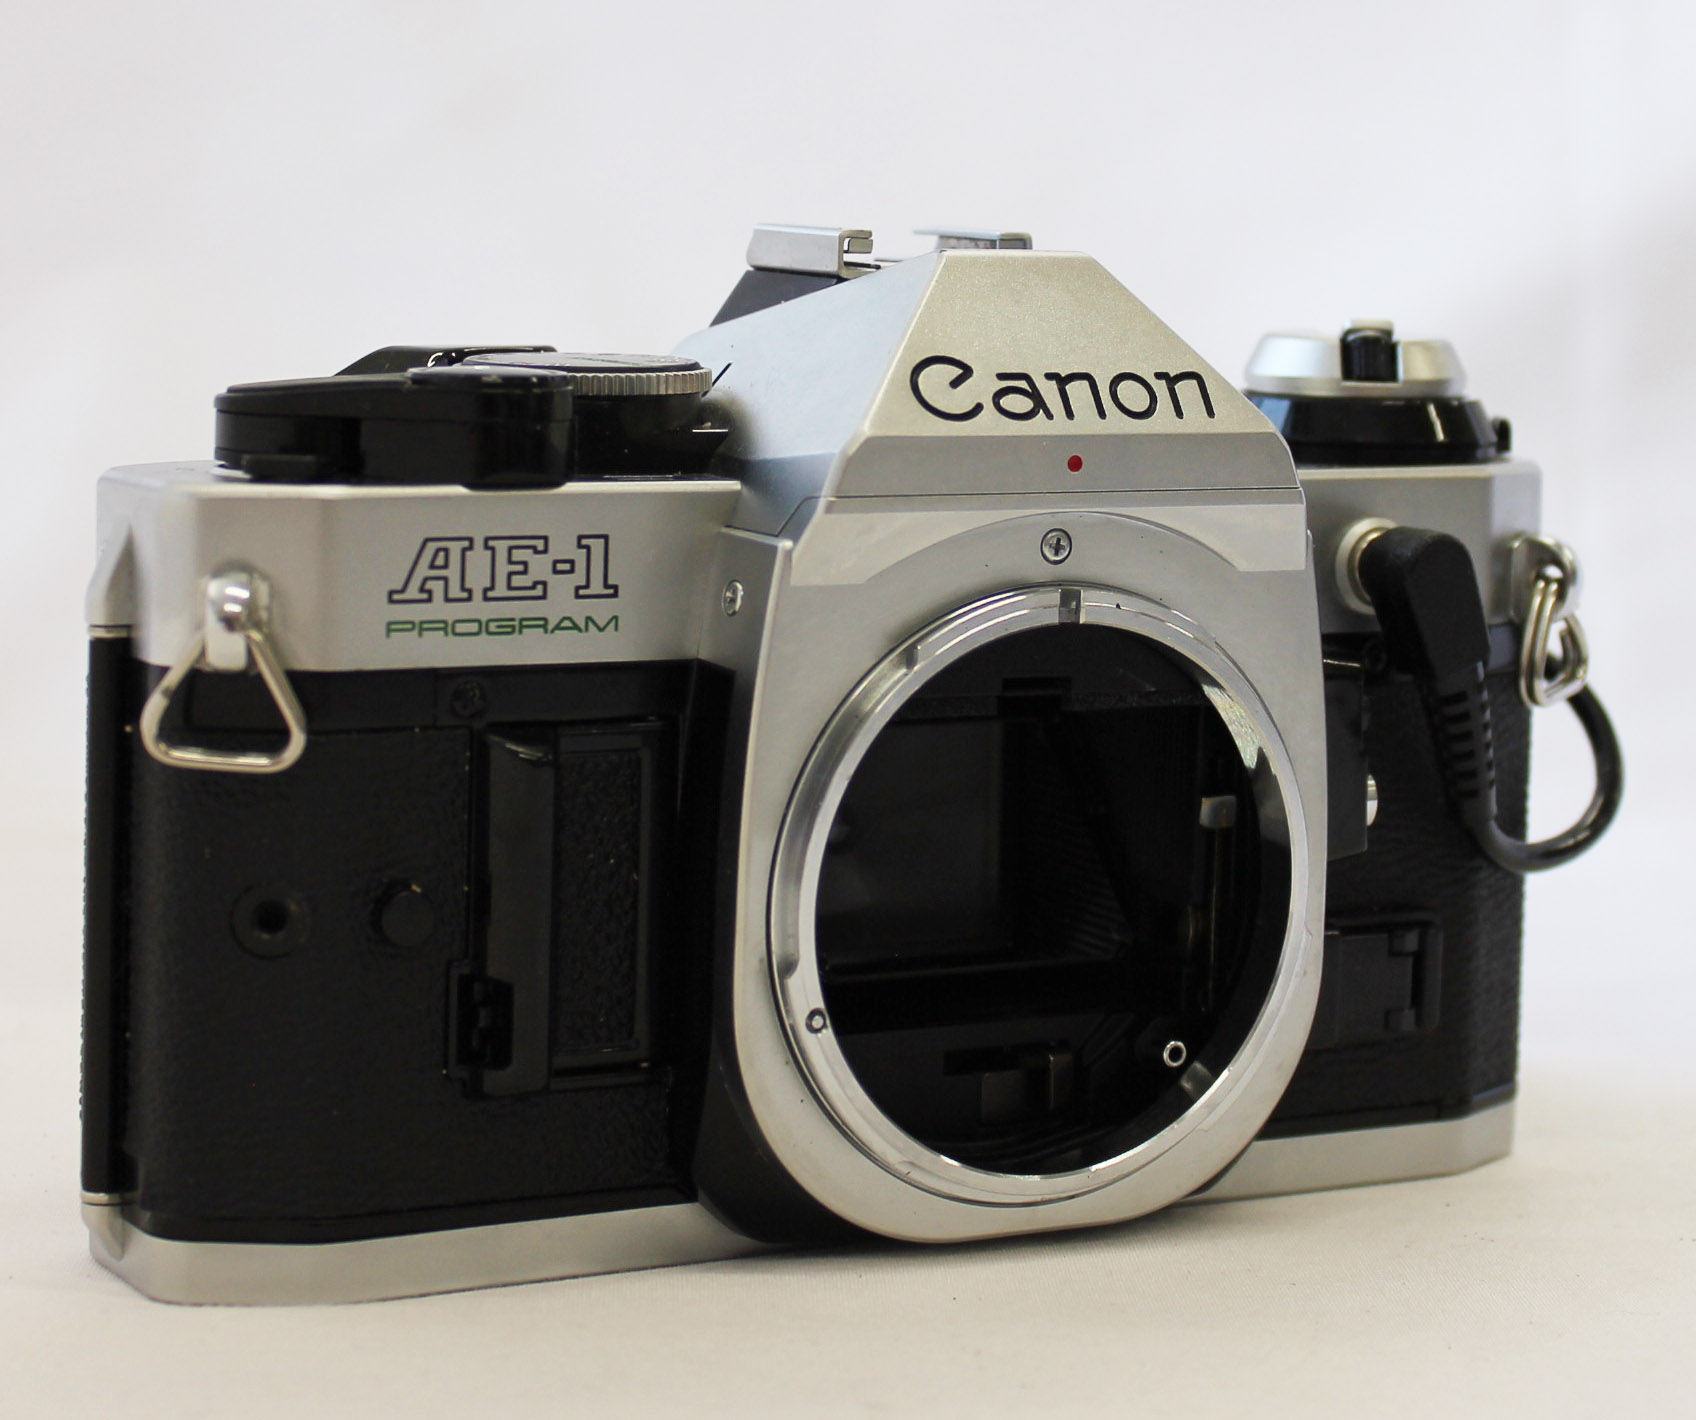 Canon AE-1 Program 35mm SLR Film Camera with New FD 50mm F/1.4 and 